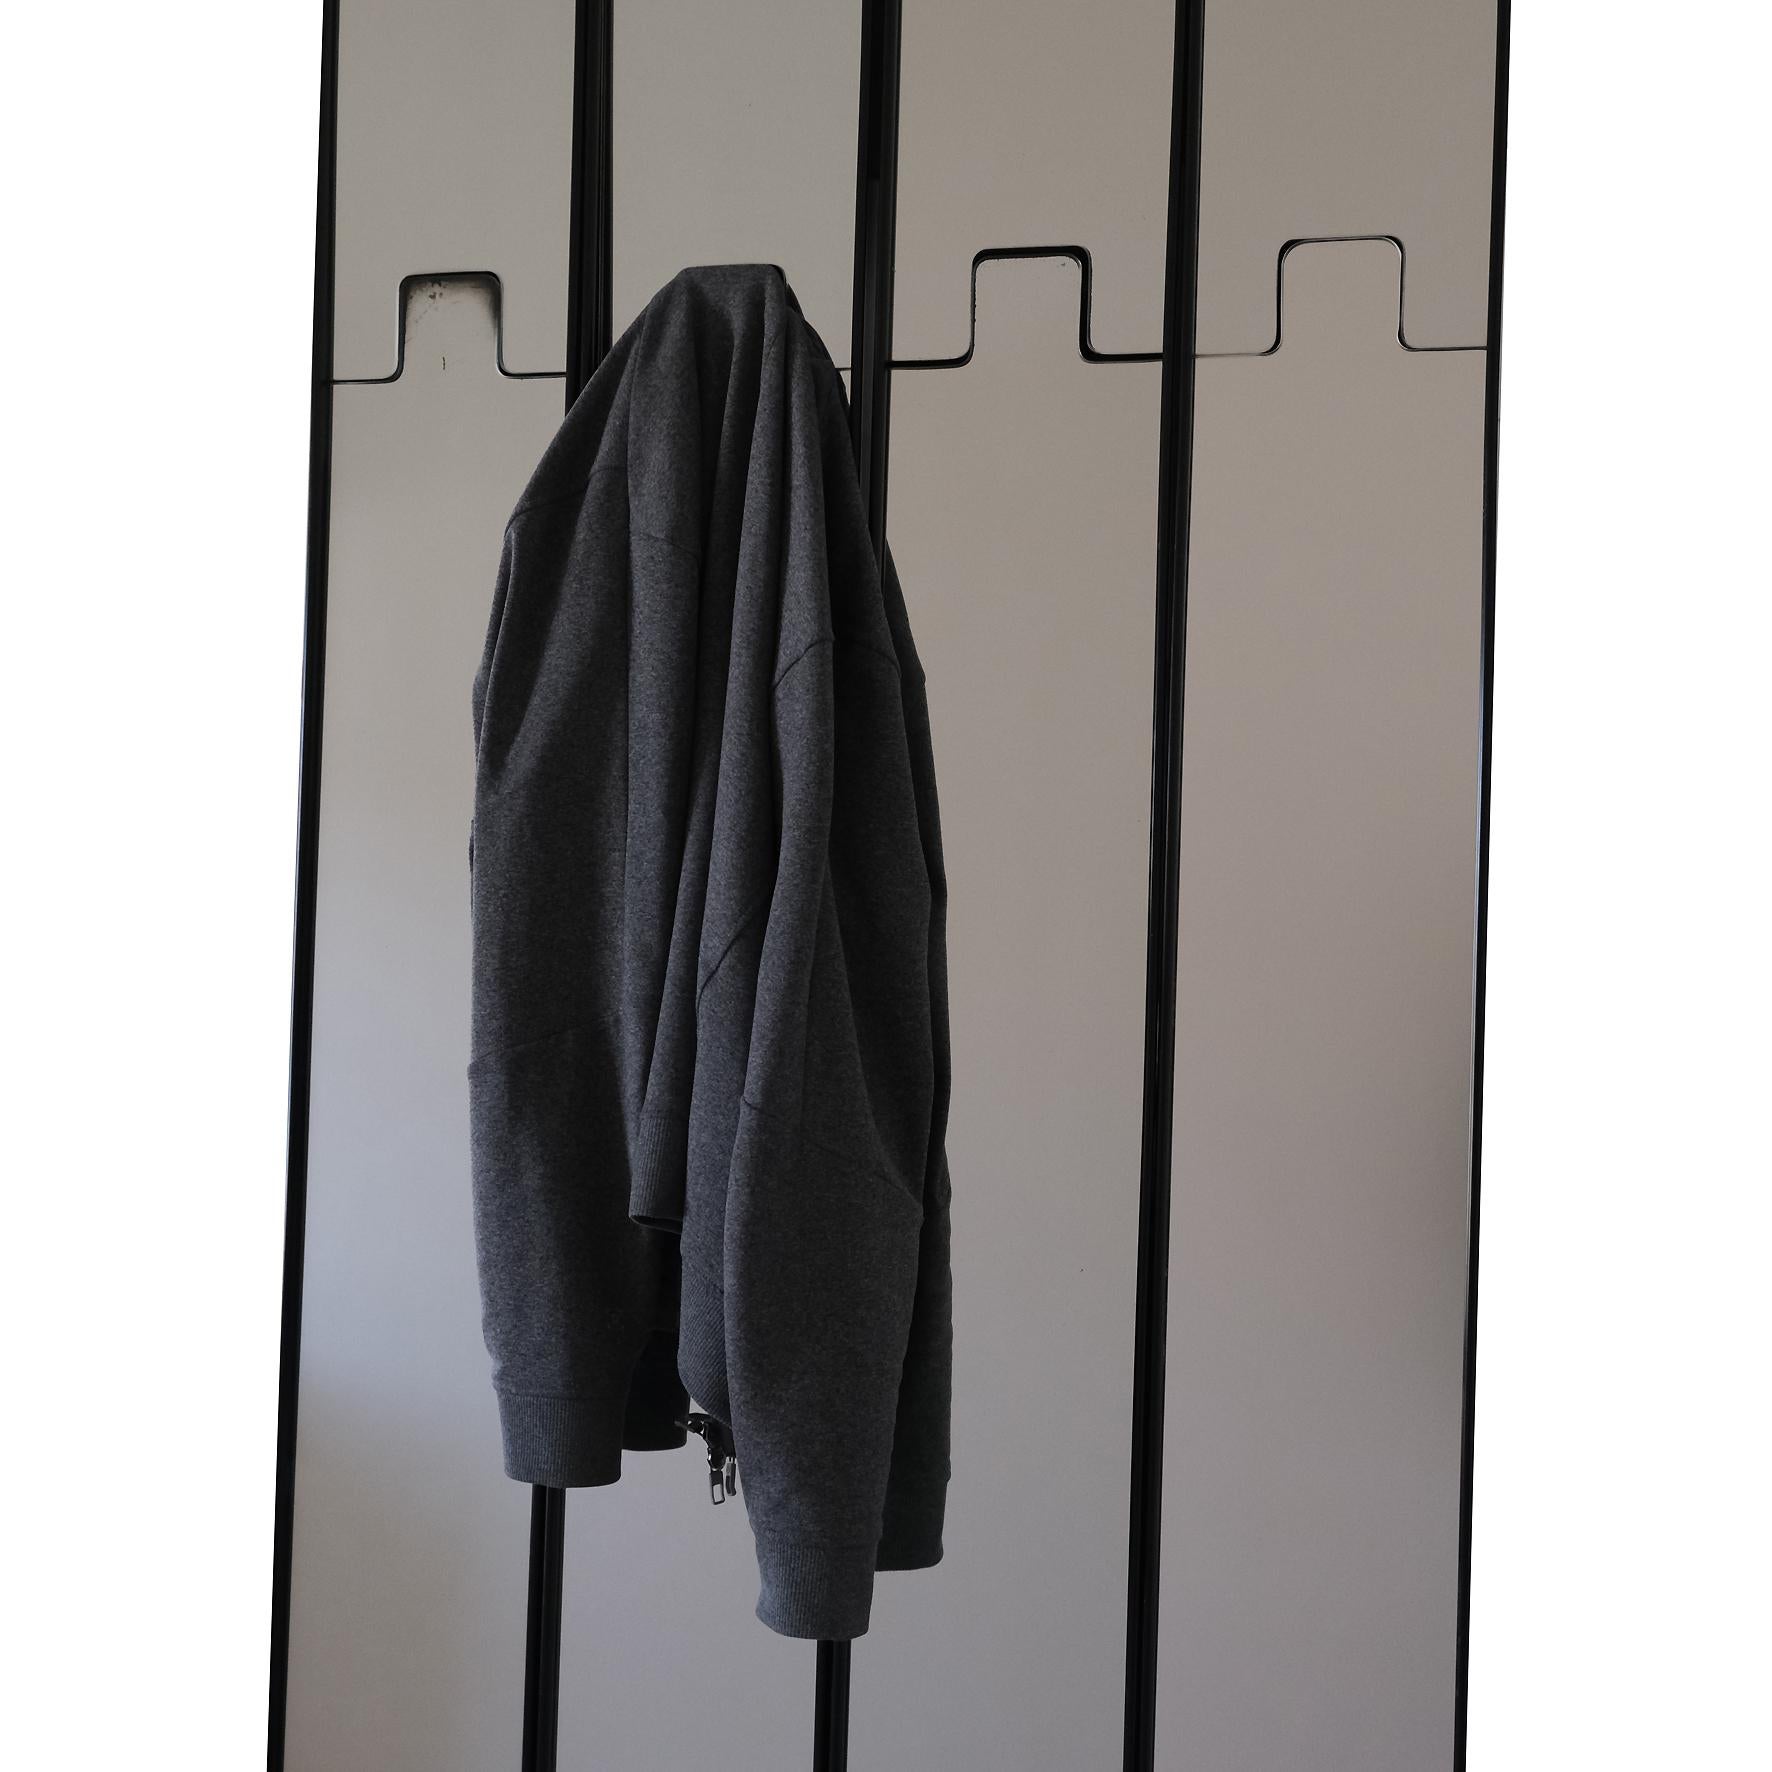 Luciano Bertoncini, a Wall Mirror and Coat-Rack, 